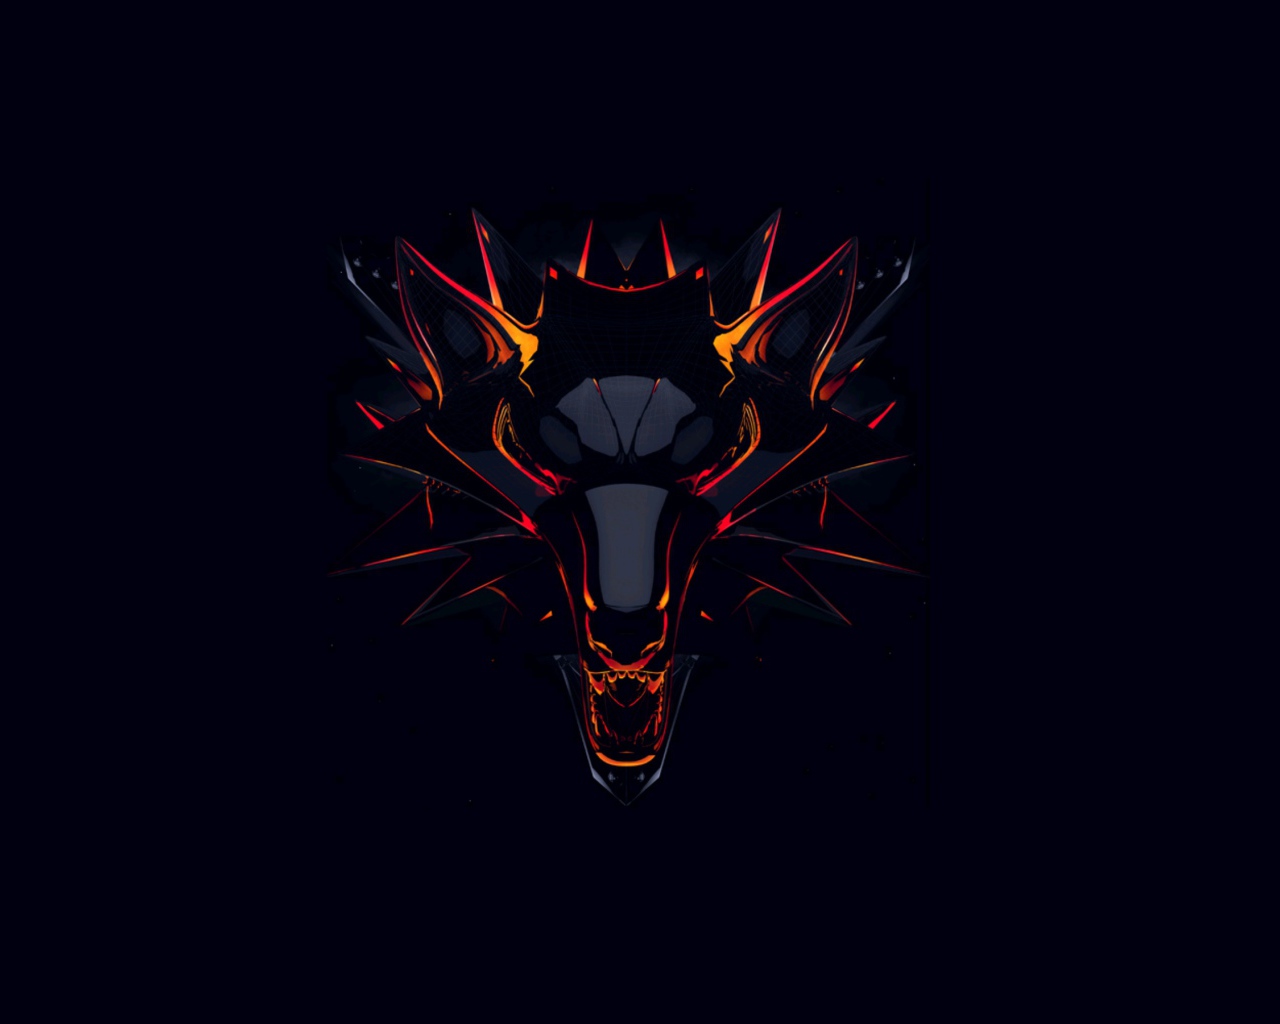 The Witcher computer game logo on a black background Desktop wallpapers  1280x1024